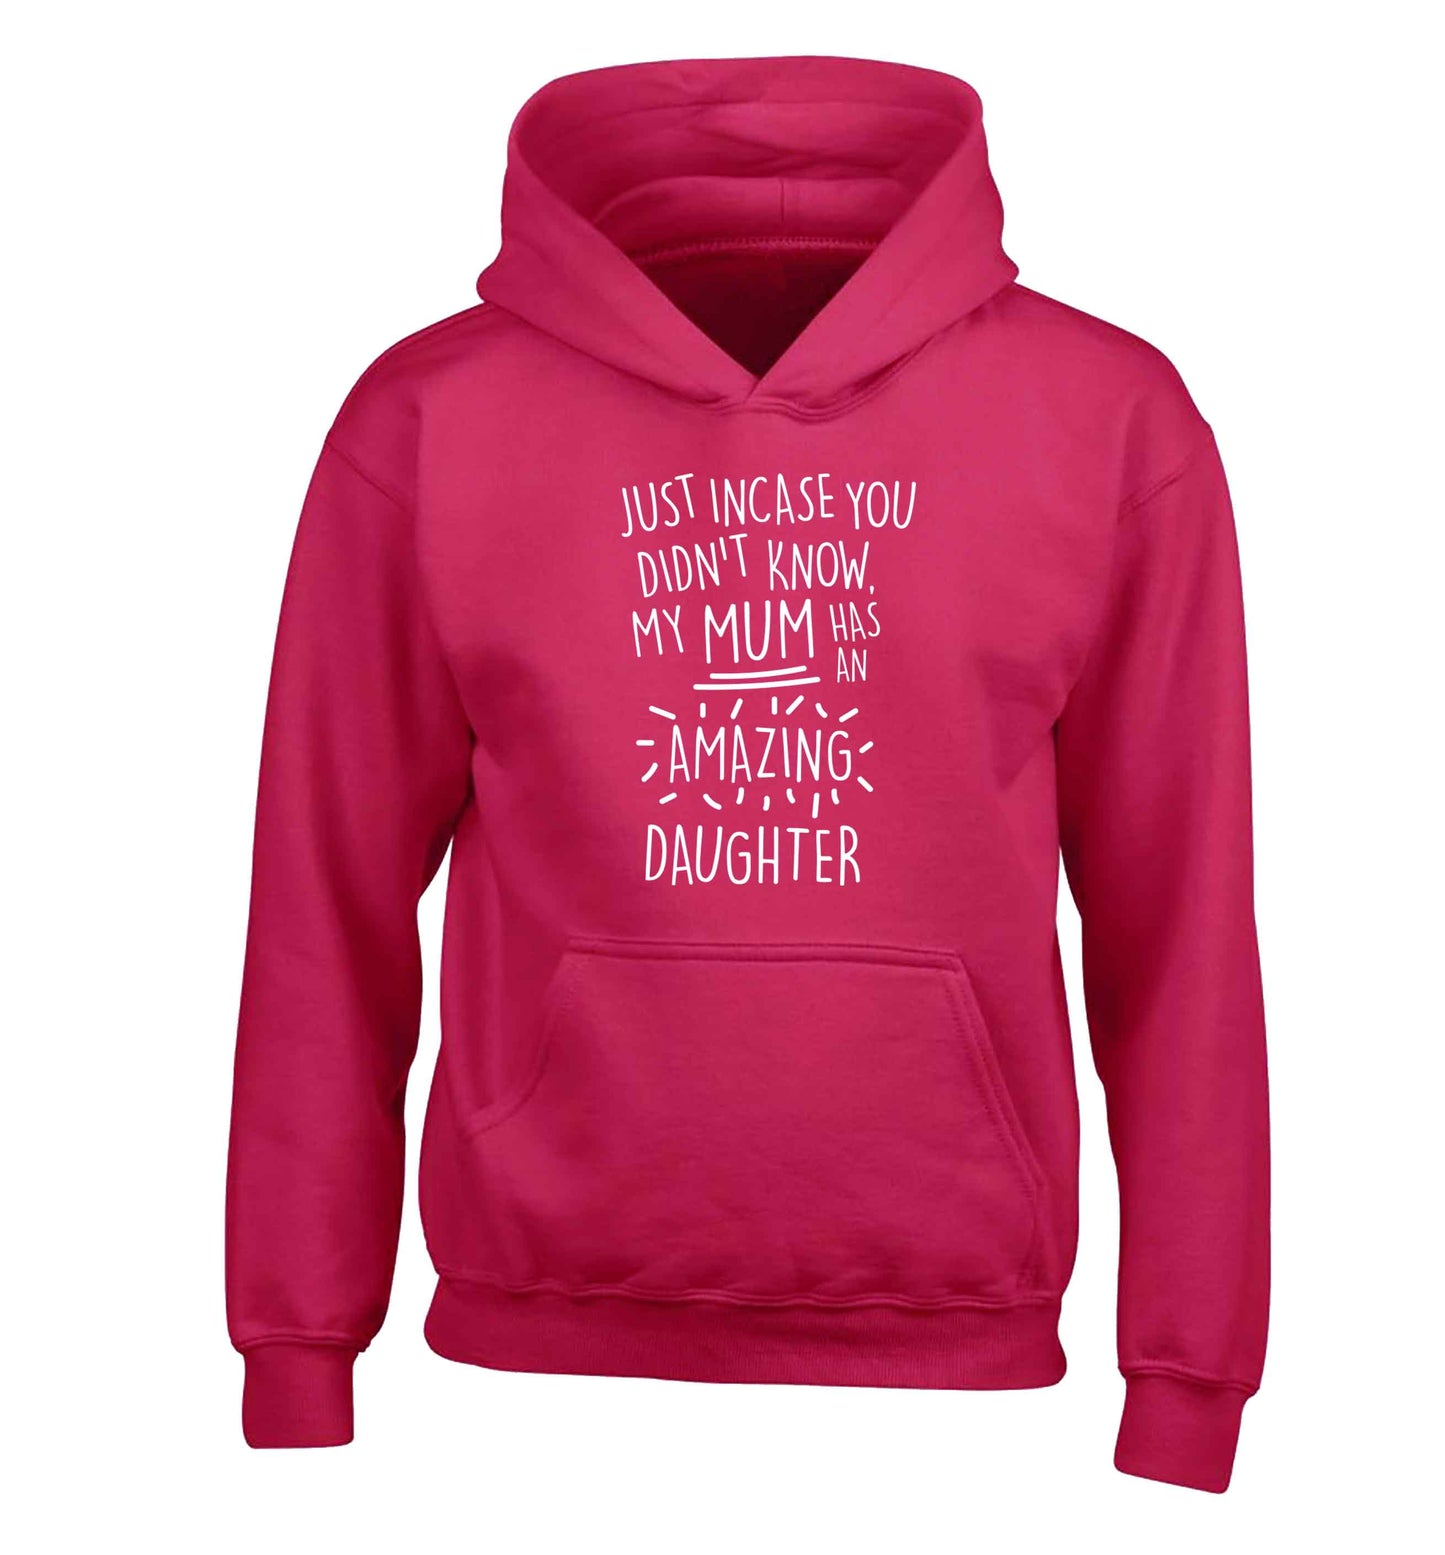 Just incase you didn't know my mum has an amazing daughter children's pink hoodie 12-13 Years